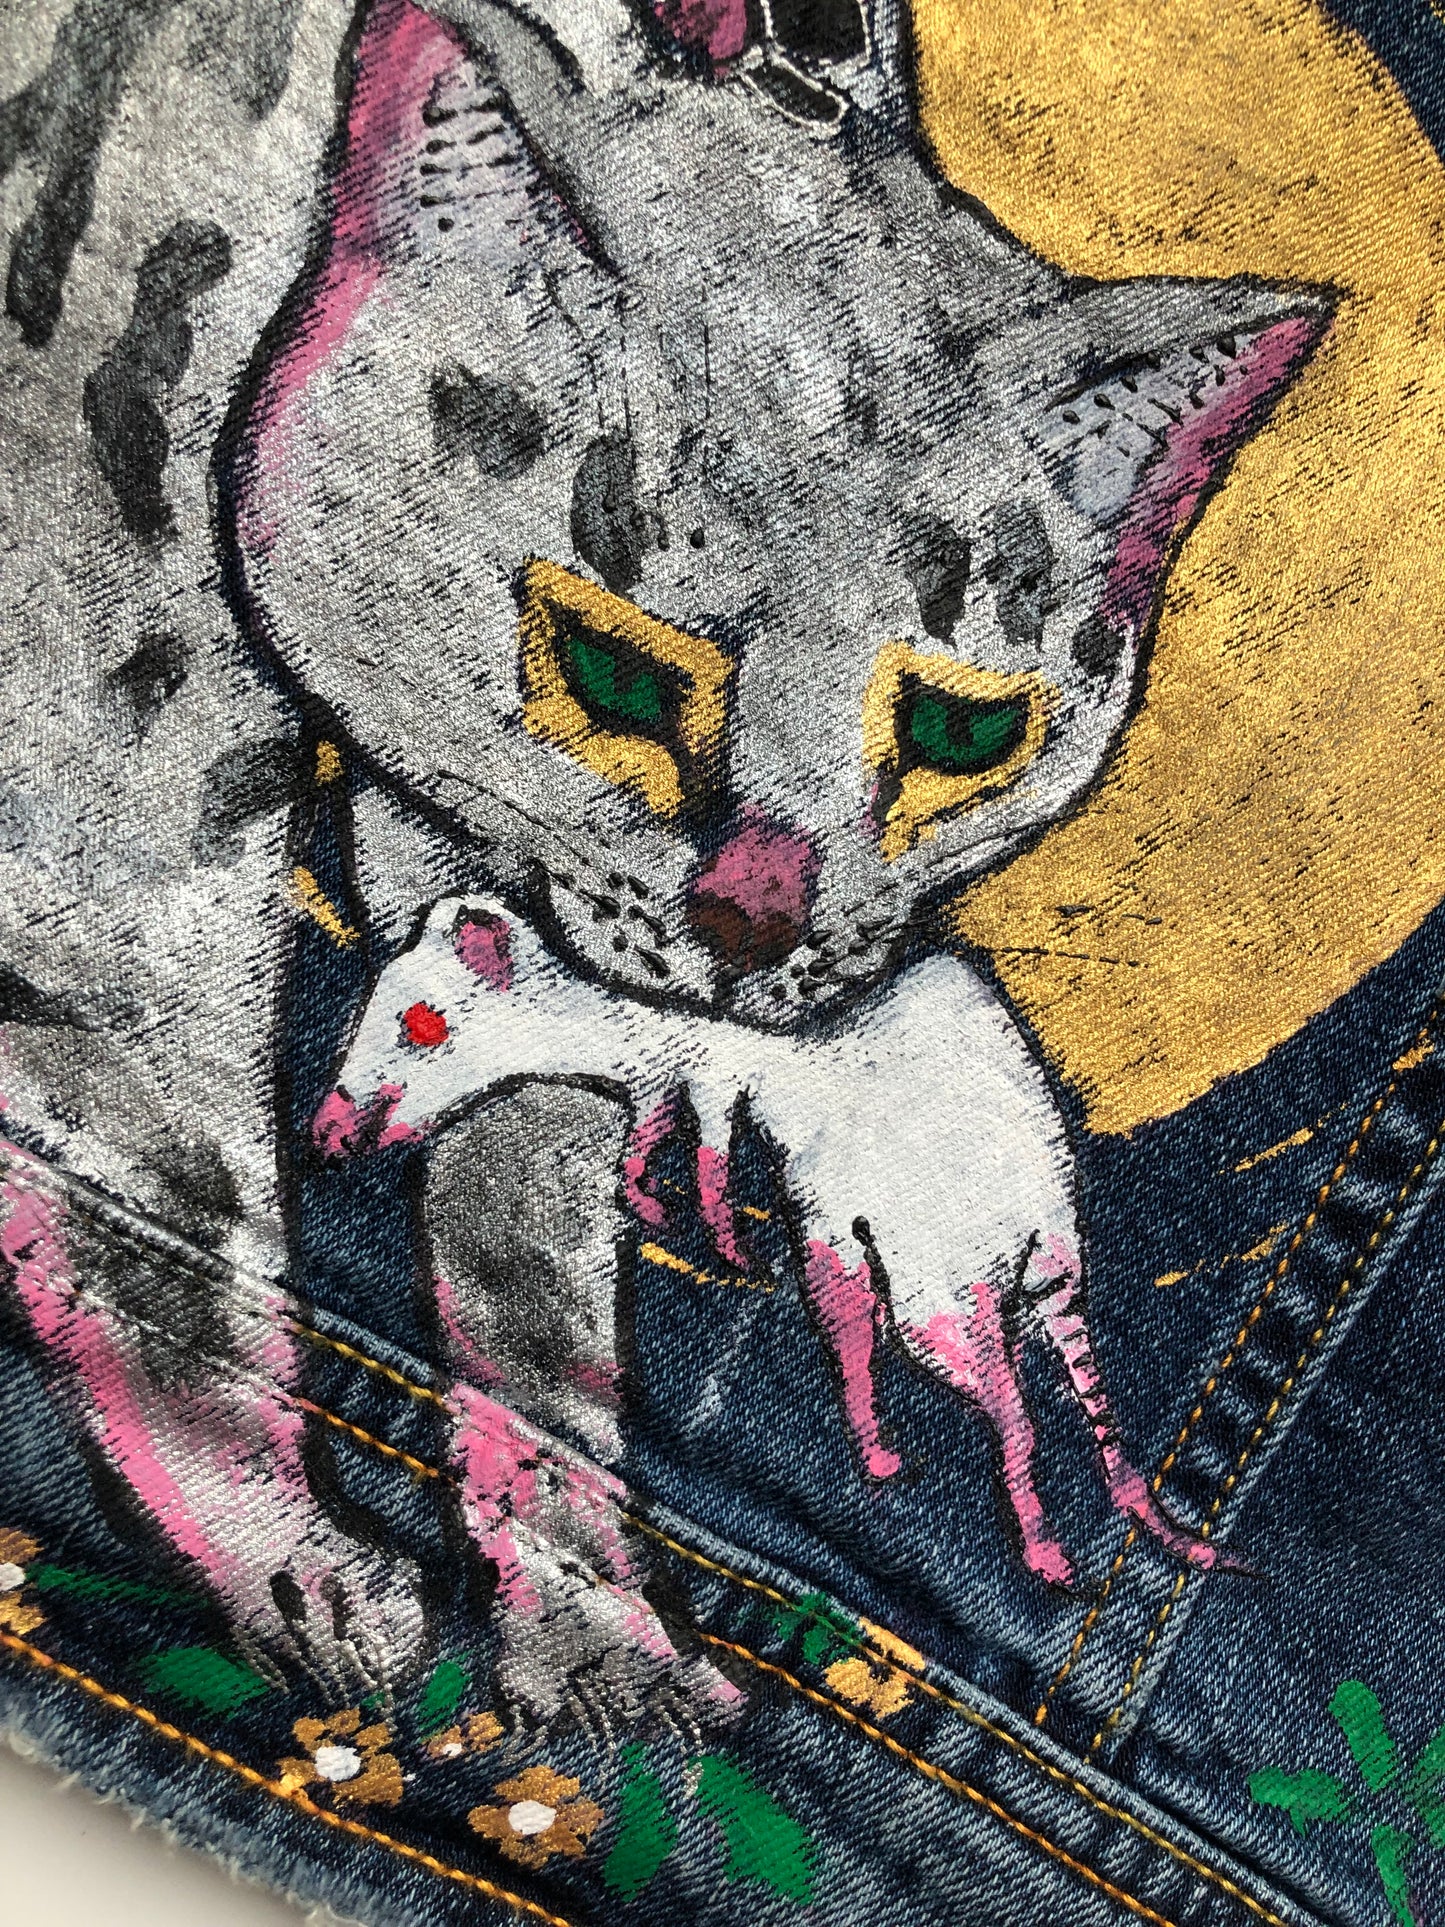 The muzzle of a cat in detail with a mustache, claws and a mouse on a women's denim jacket